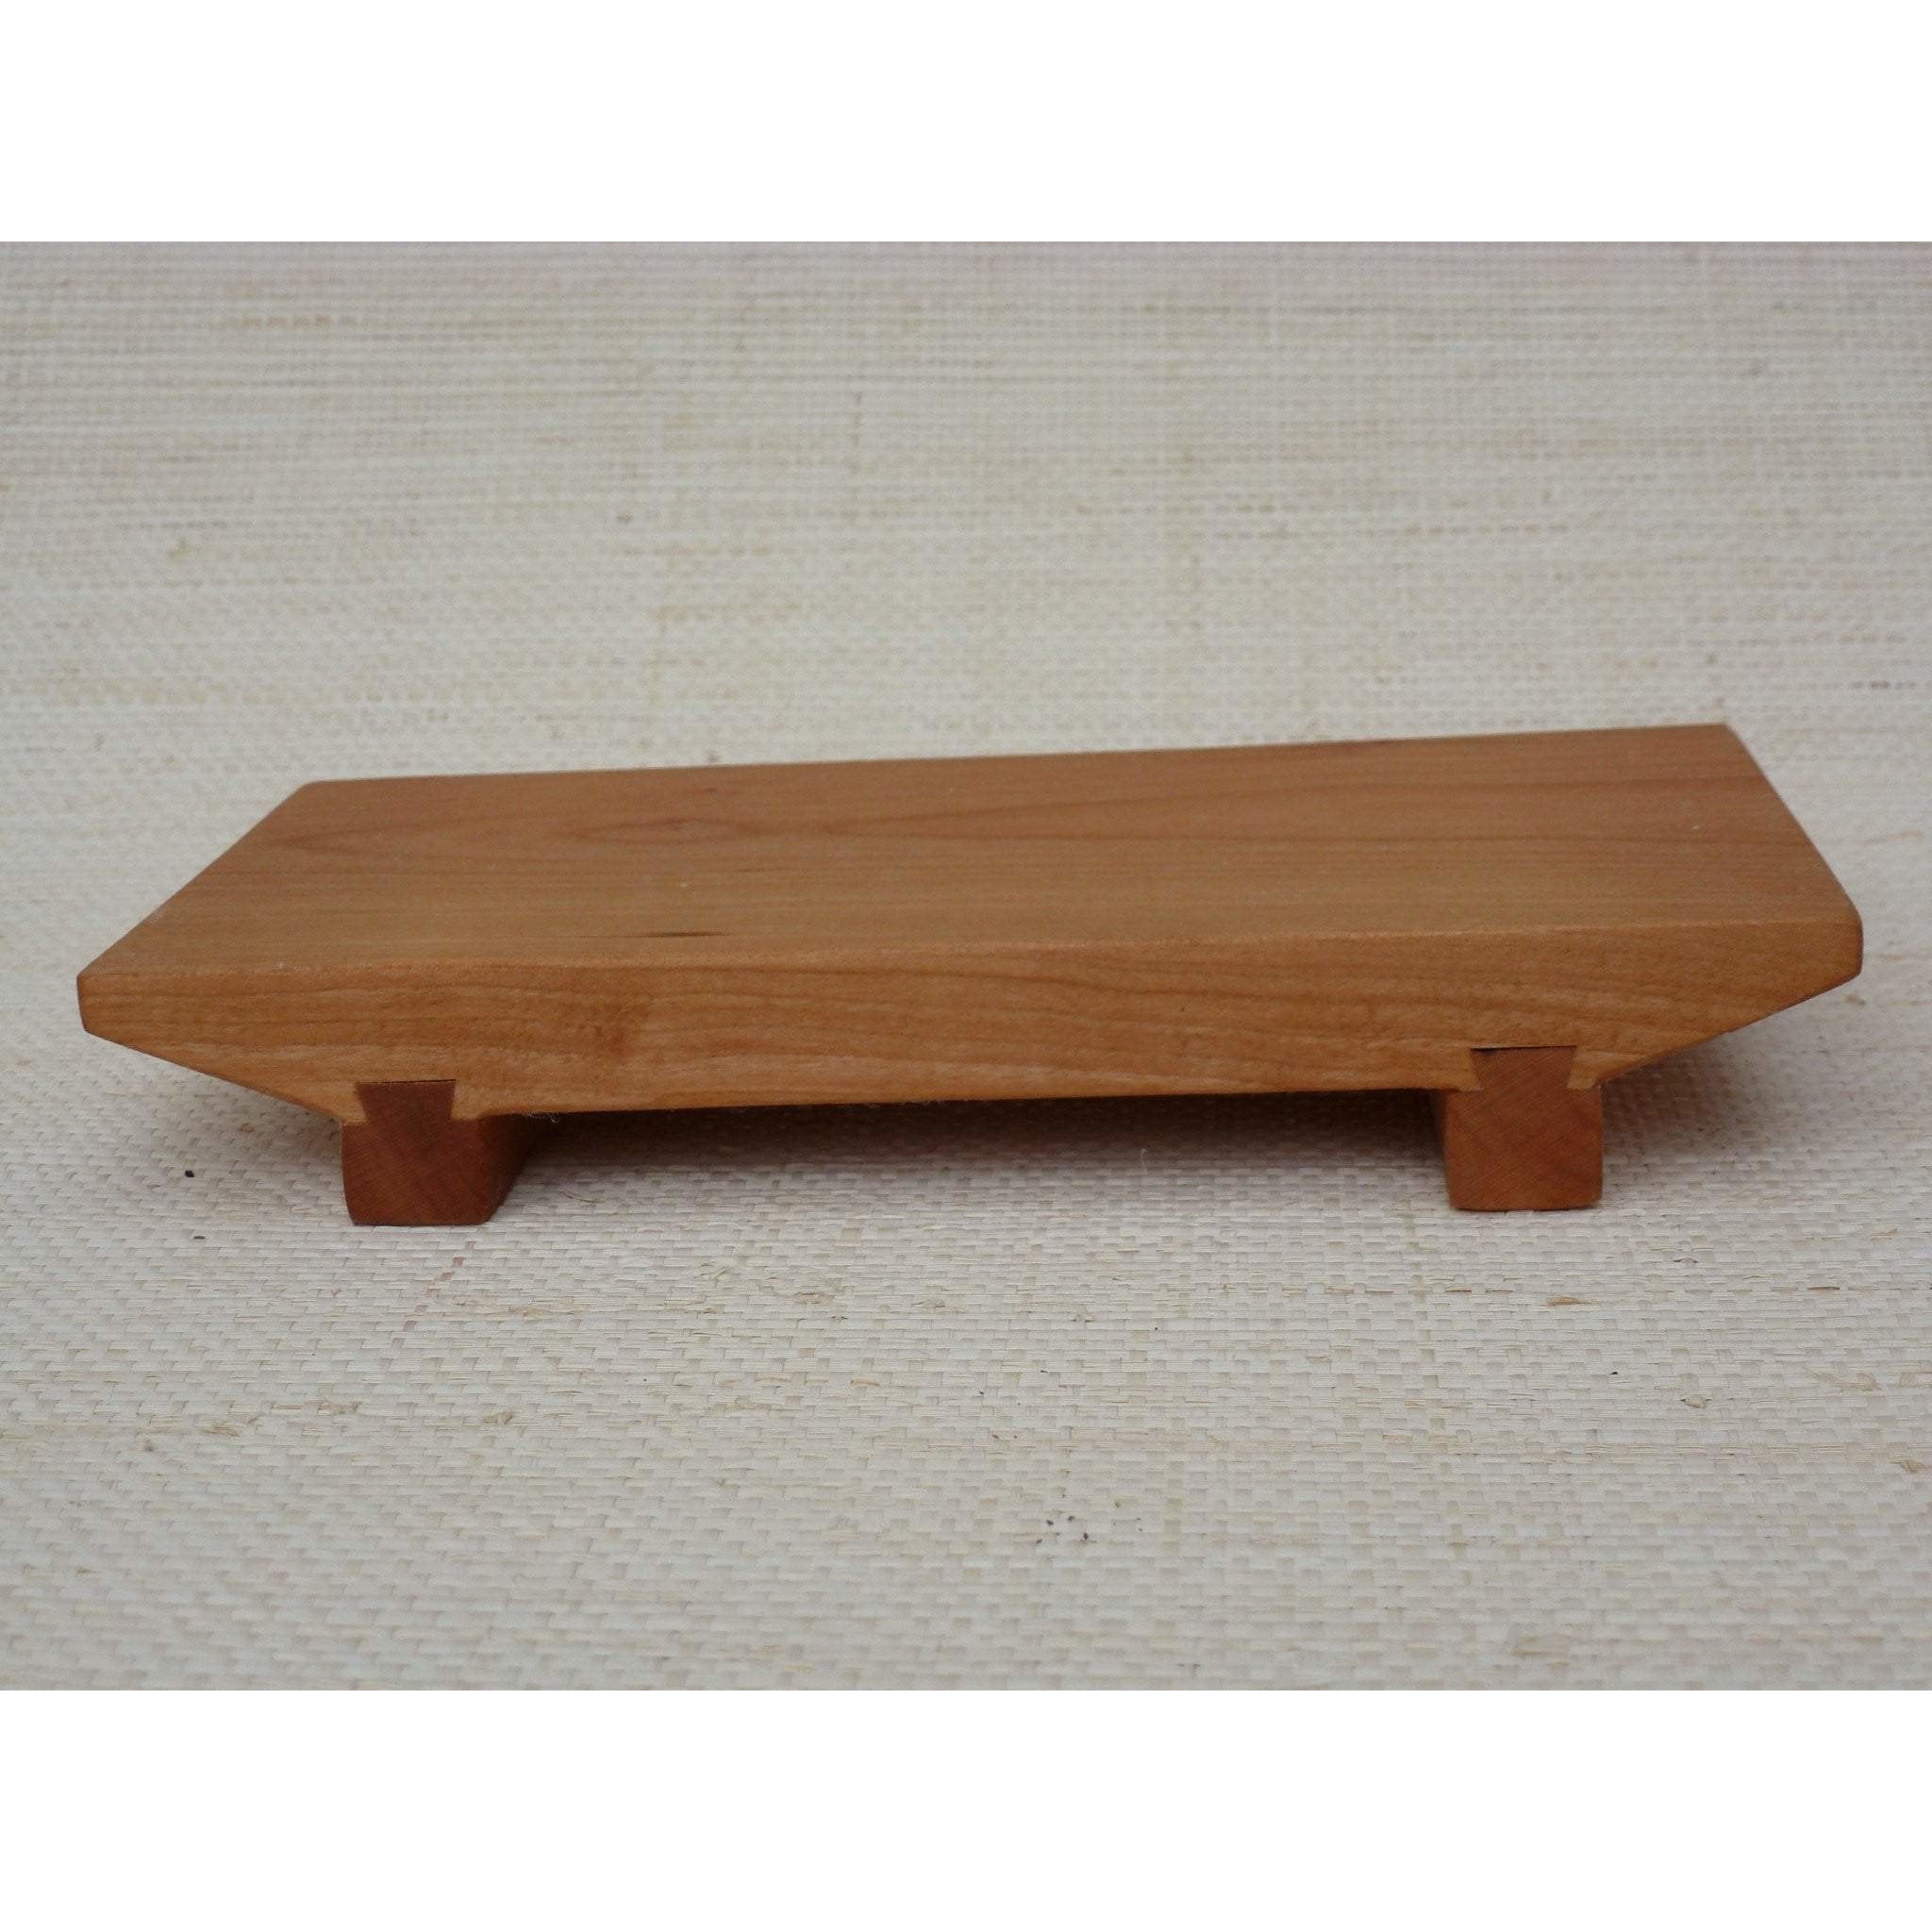 https://cdn.shopify.com/s/files/1/0764/9111/products/handmade-hardwood-sushi-getas-available-in-multiple-sizes-boards-geta-serving-platter-table-ware-furniture-wood_944.jpg?crop=center&height=2925&v=1584659195&width=2048